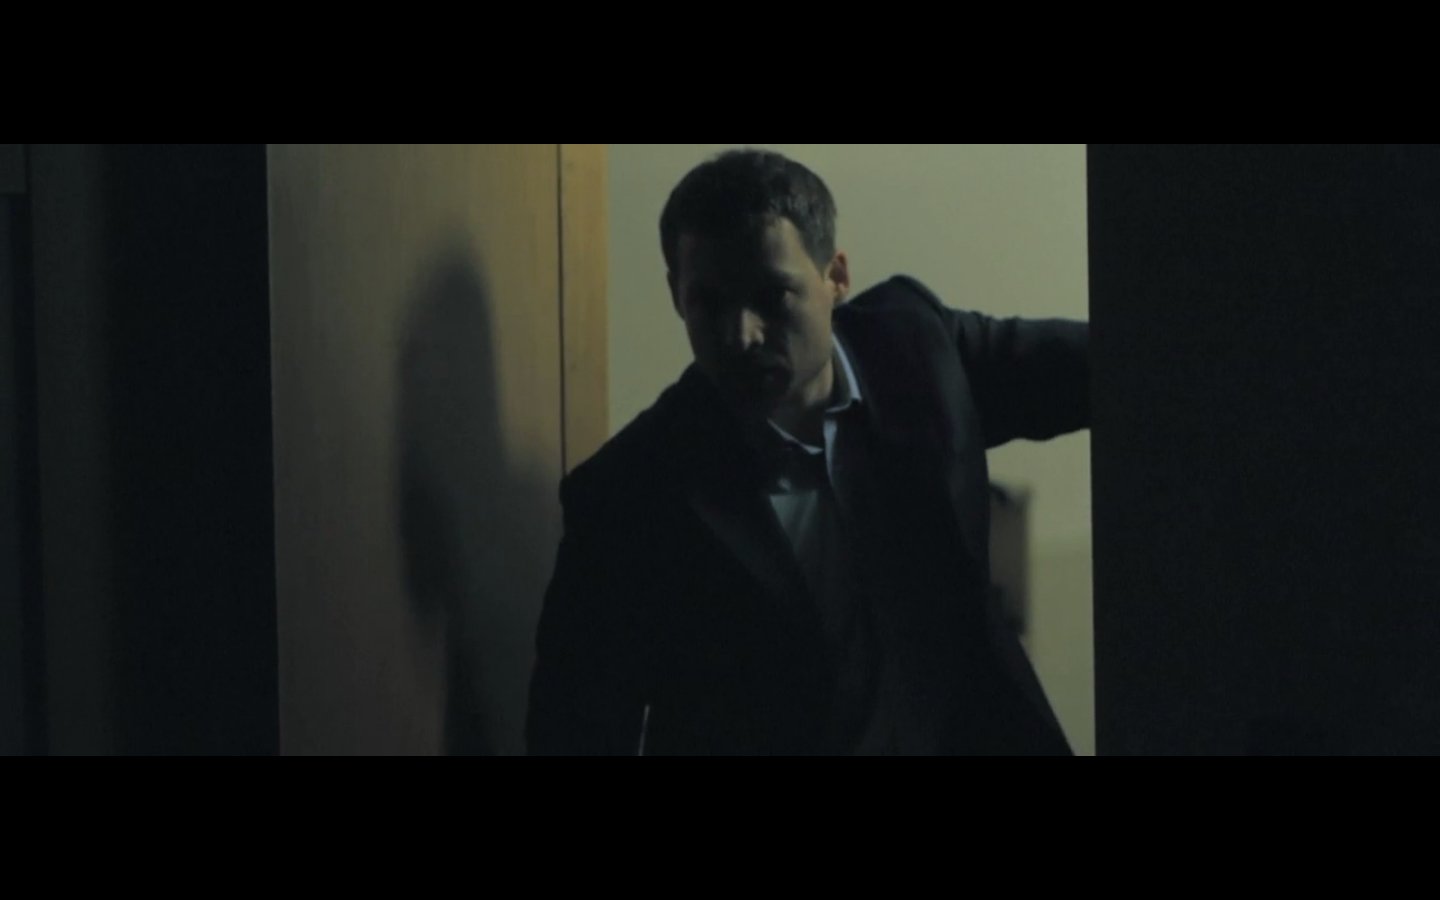 Screen Capture from Mr Fogg 'A Little Letting Go' 2012